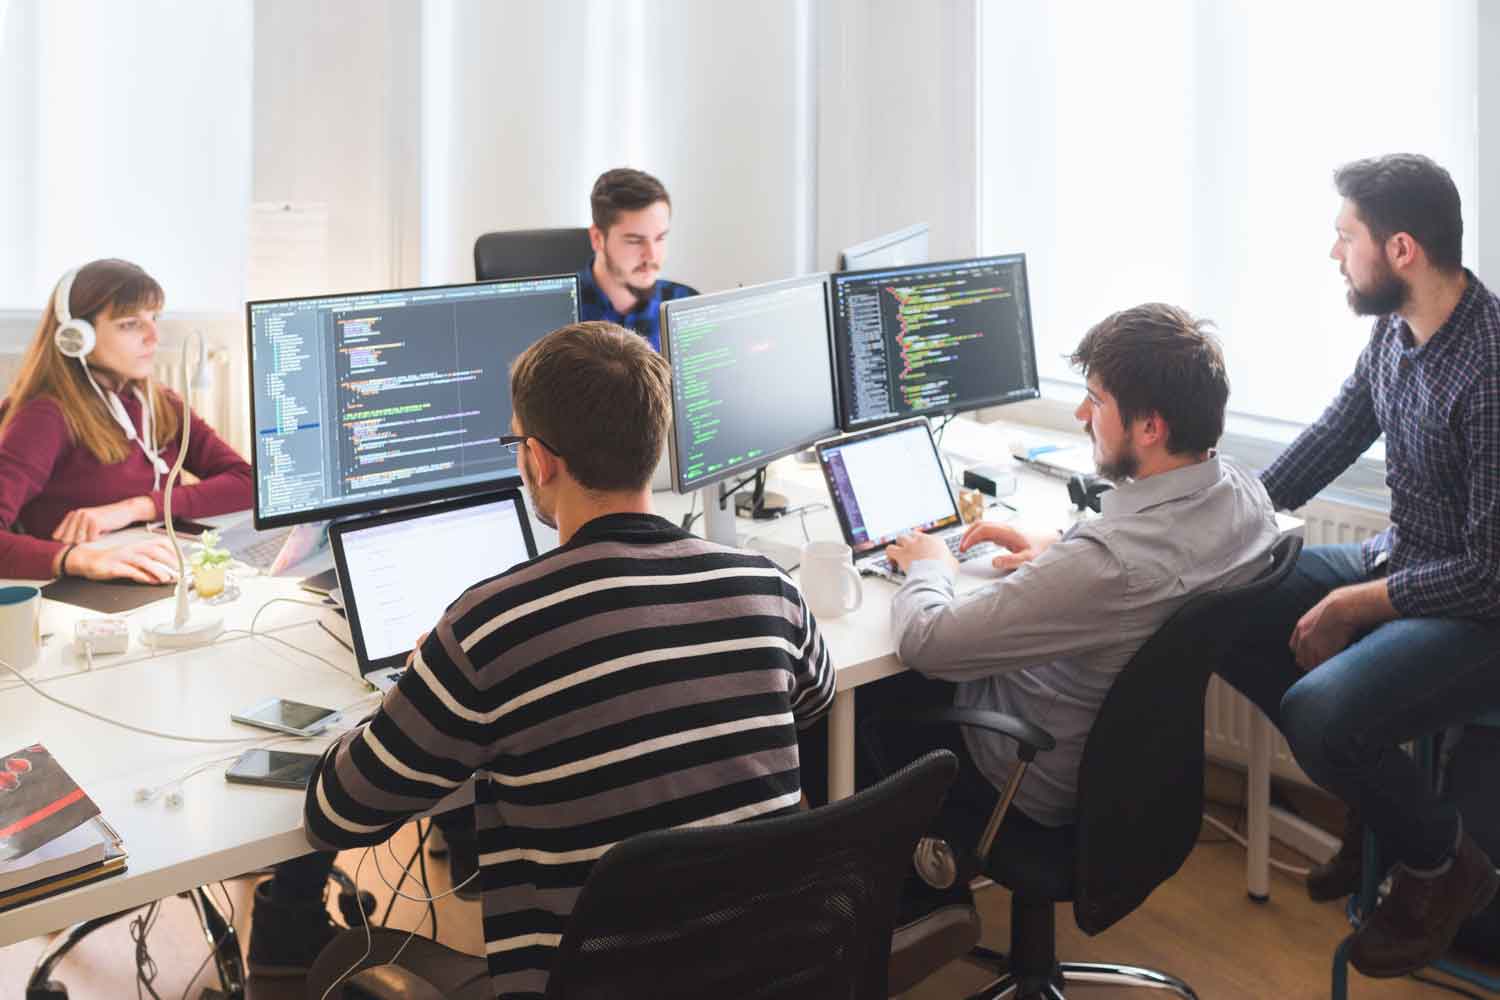 Group of software developers sitting at desktop computers being focused on their work